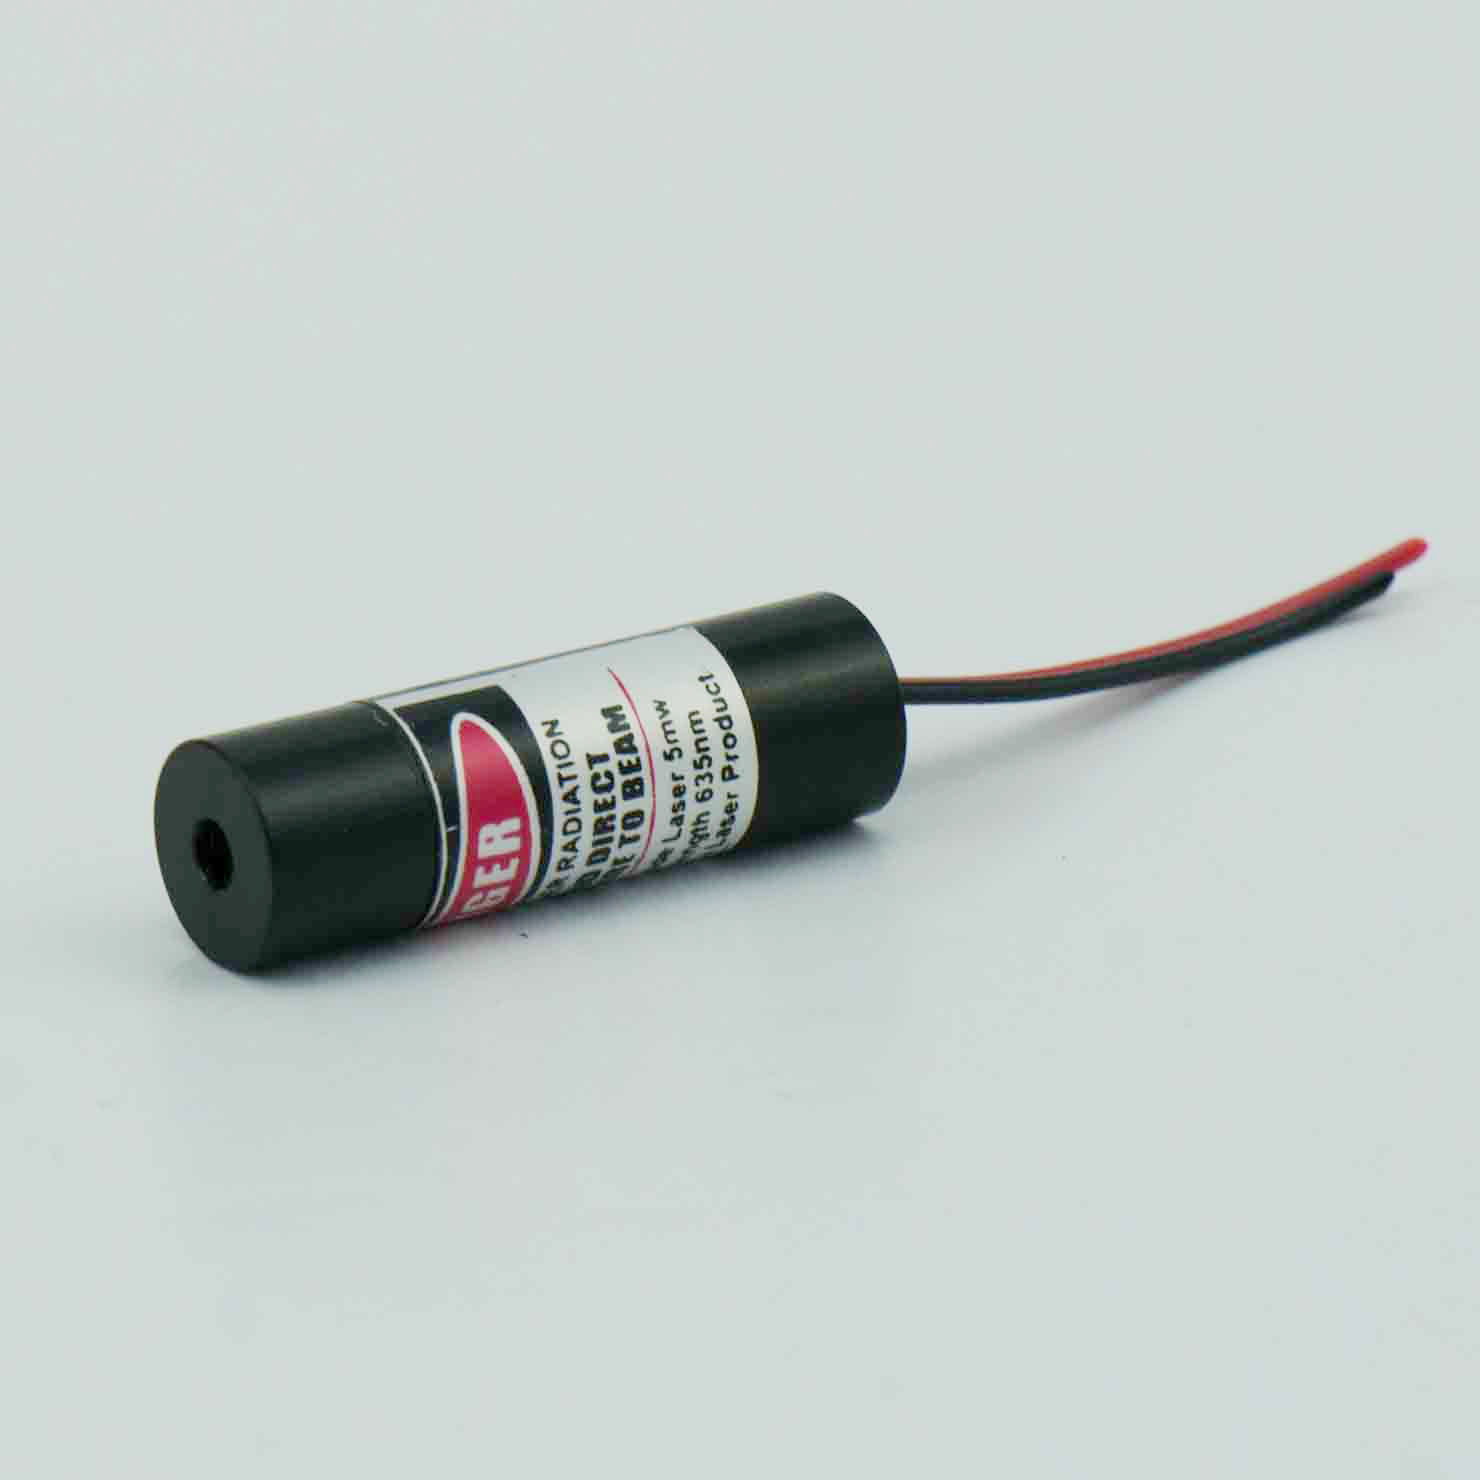 635nm 20mW Red Dot Laser Pointers Visible Red Beam Laser Light